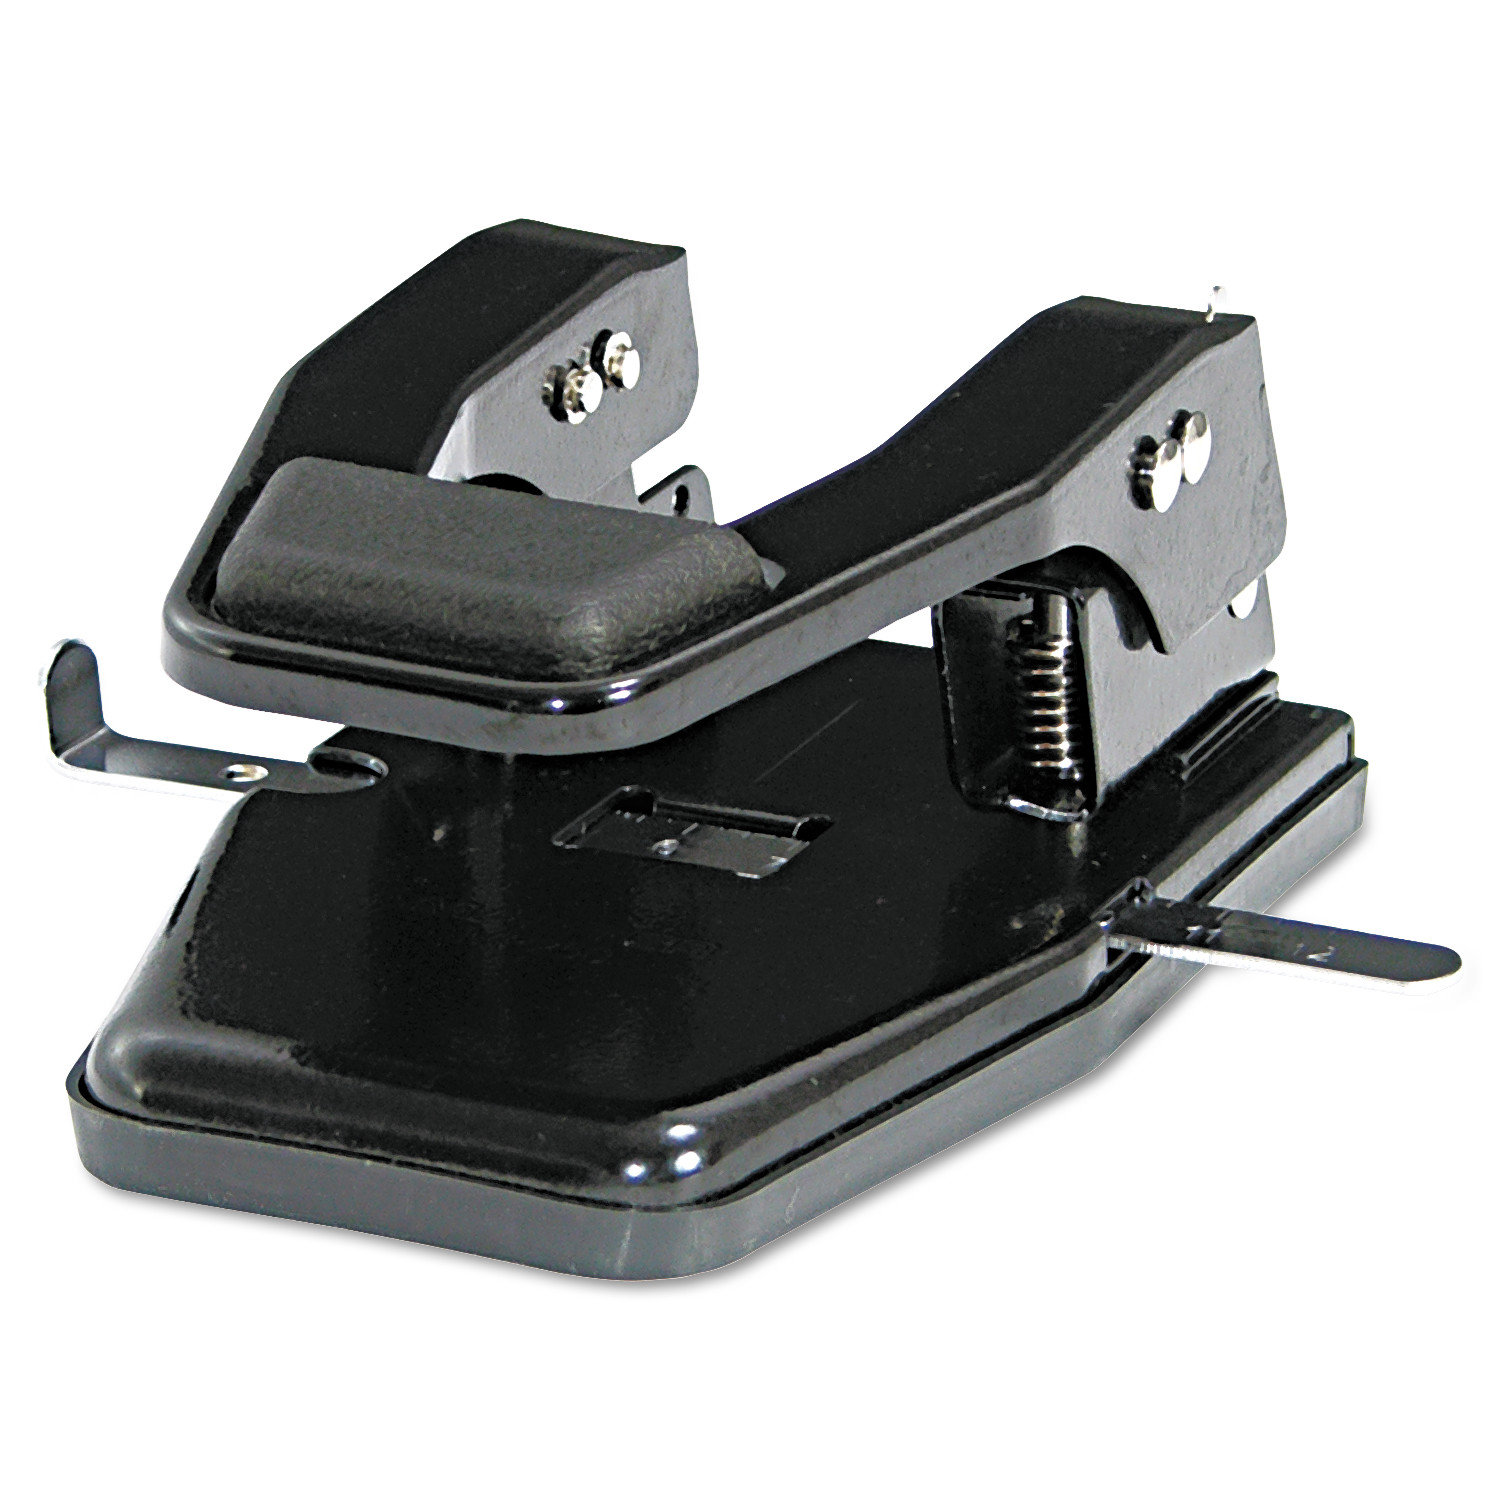 Master MP250 Hole Punch - 2 Punch Head(s) - 40 Sheet of 20lb Paper - 9/32" Punch Size - Round Shape - 13.8" x 12.5" x 9.5" - Bla